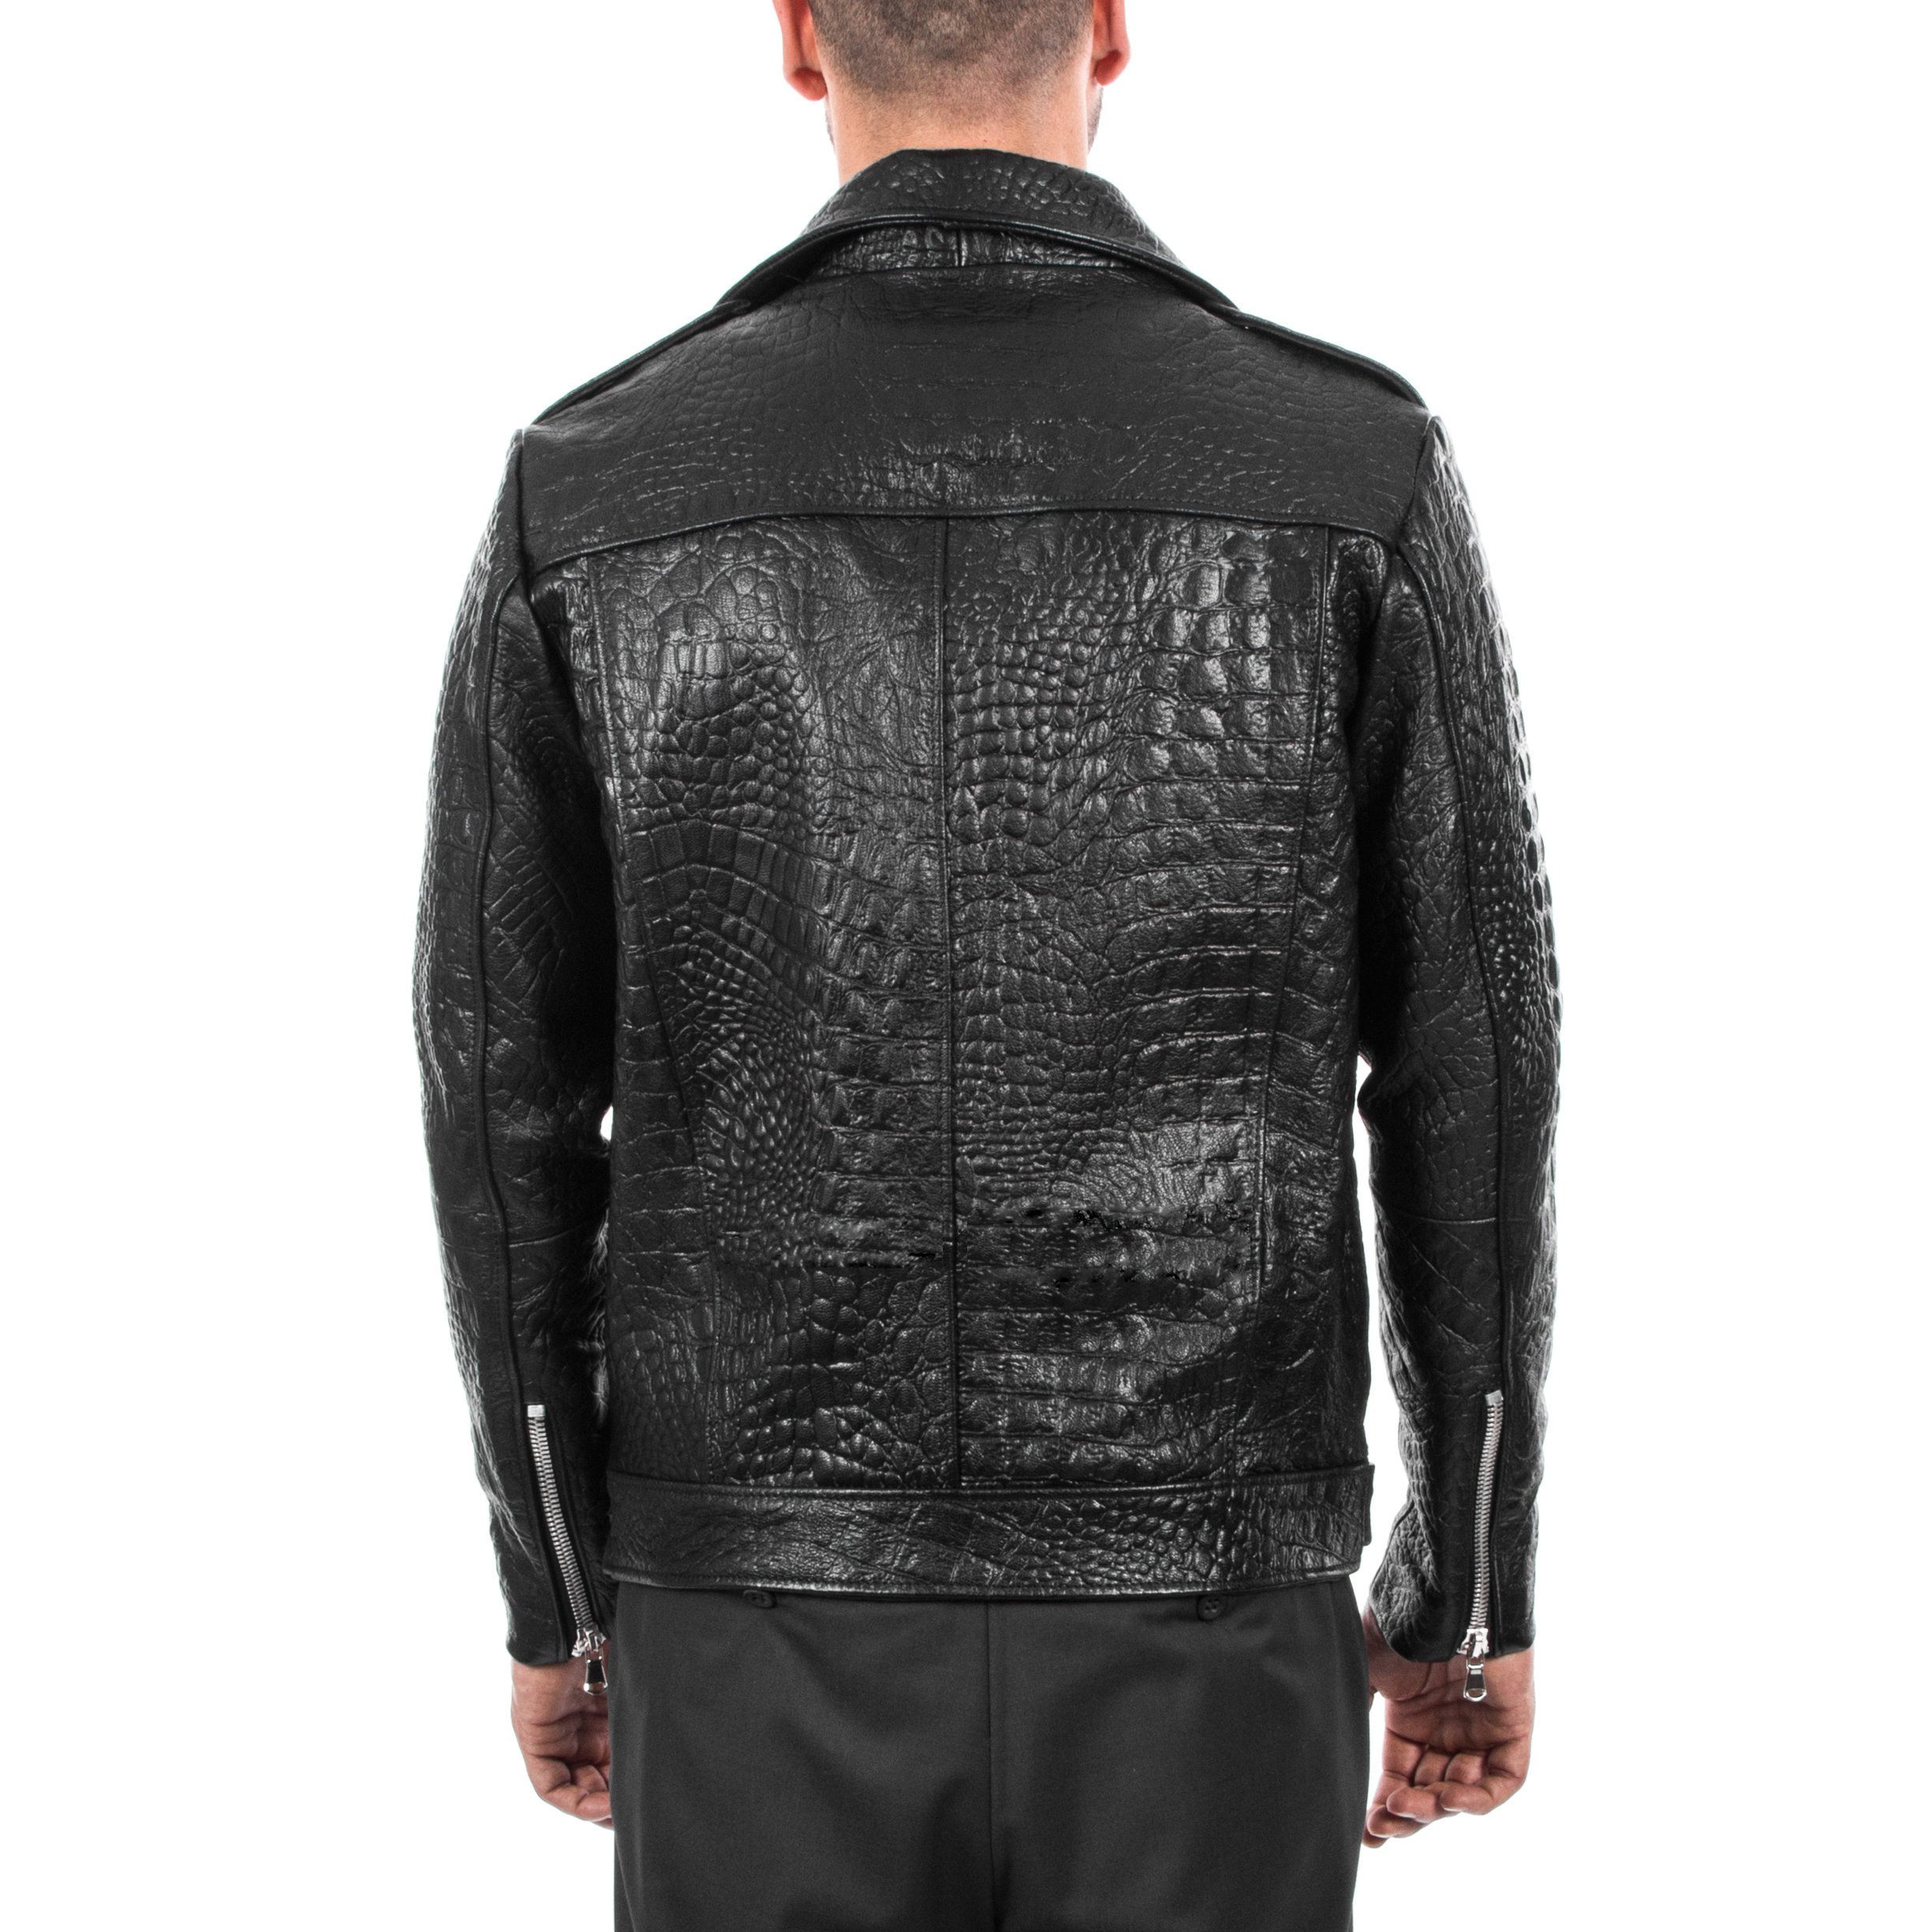 Crocodile Leather Jacket For Him With Shearling Collar